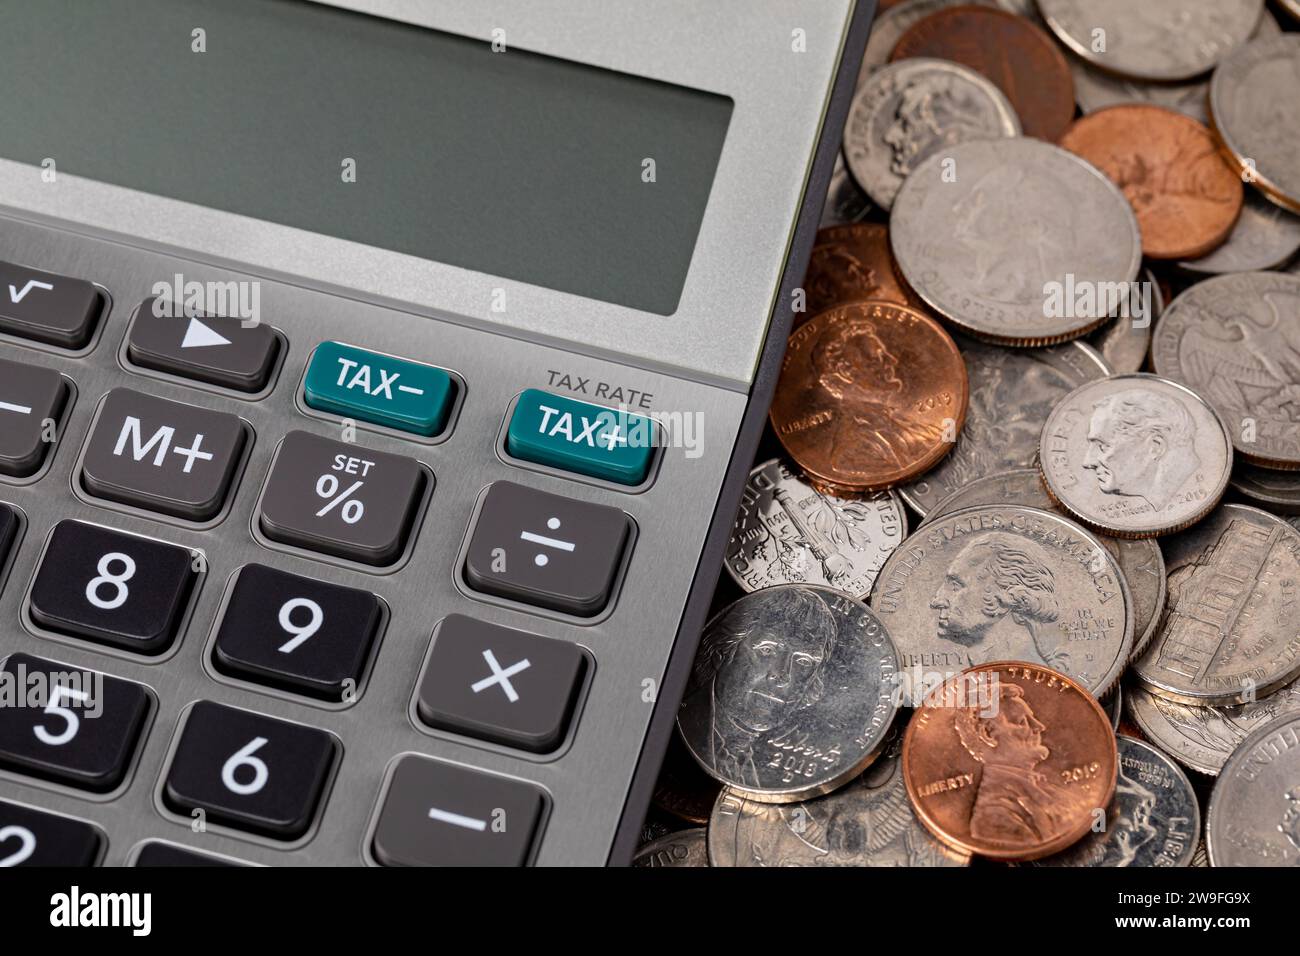 Tax calculator with coins. Income, sales and property taxes concept. Stock Photo